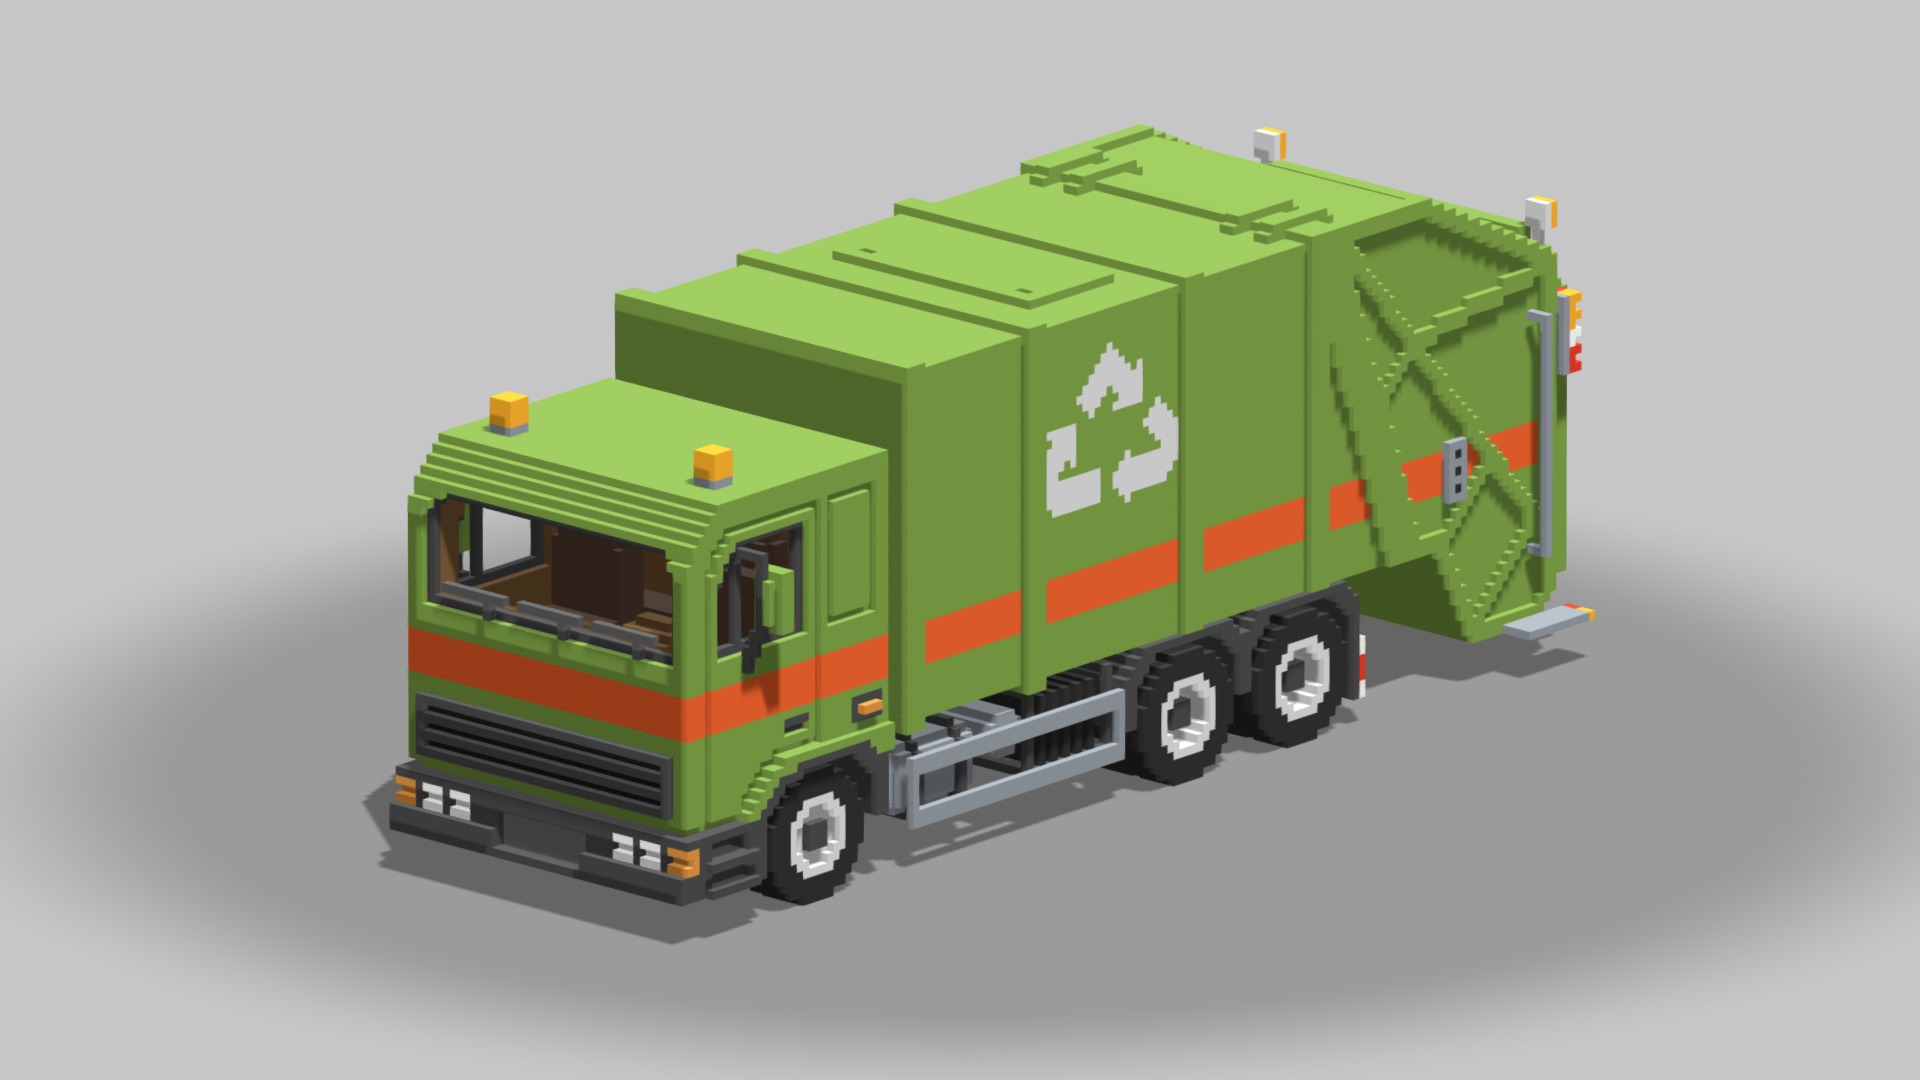 3D model Voxel Garbage Truck - This is a 3D model of the Voxel Garbage Truck. The 3D model is about a green and red toy truck.